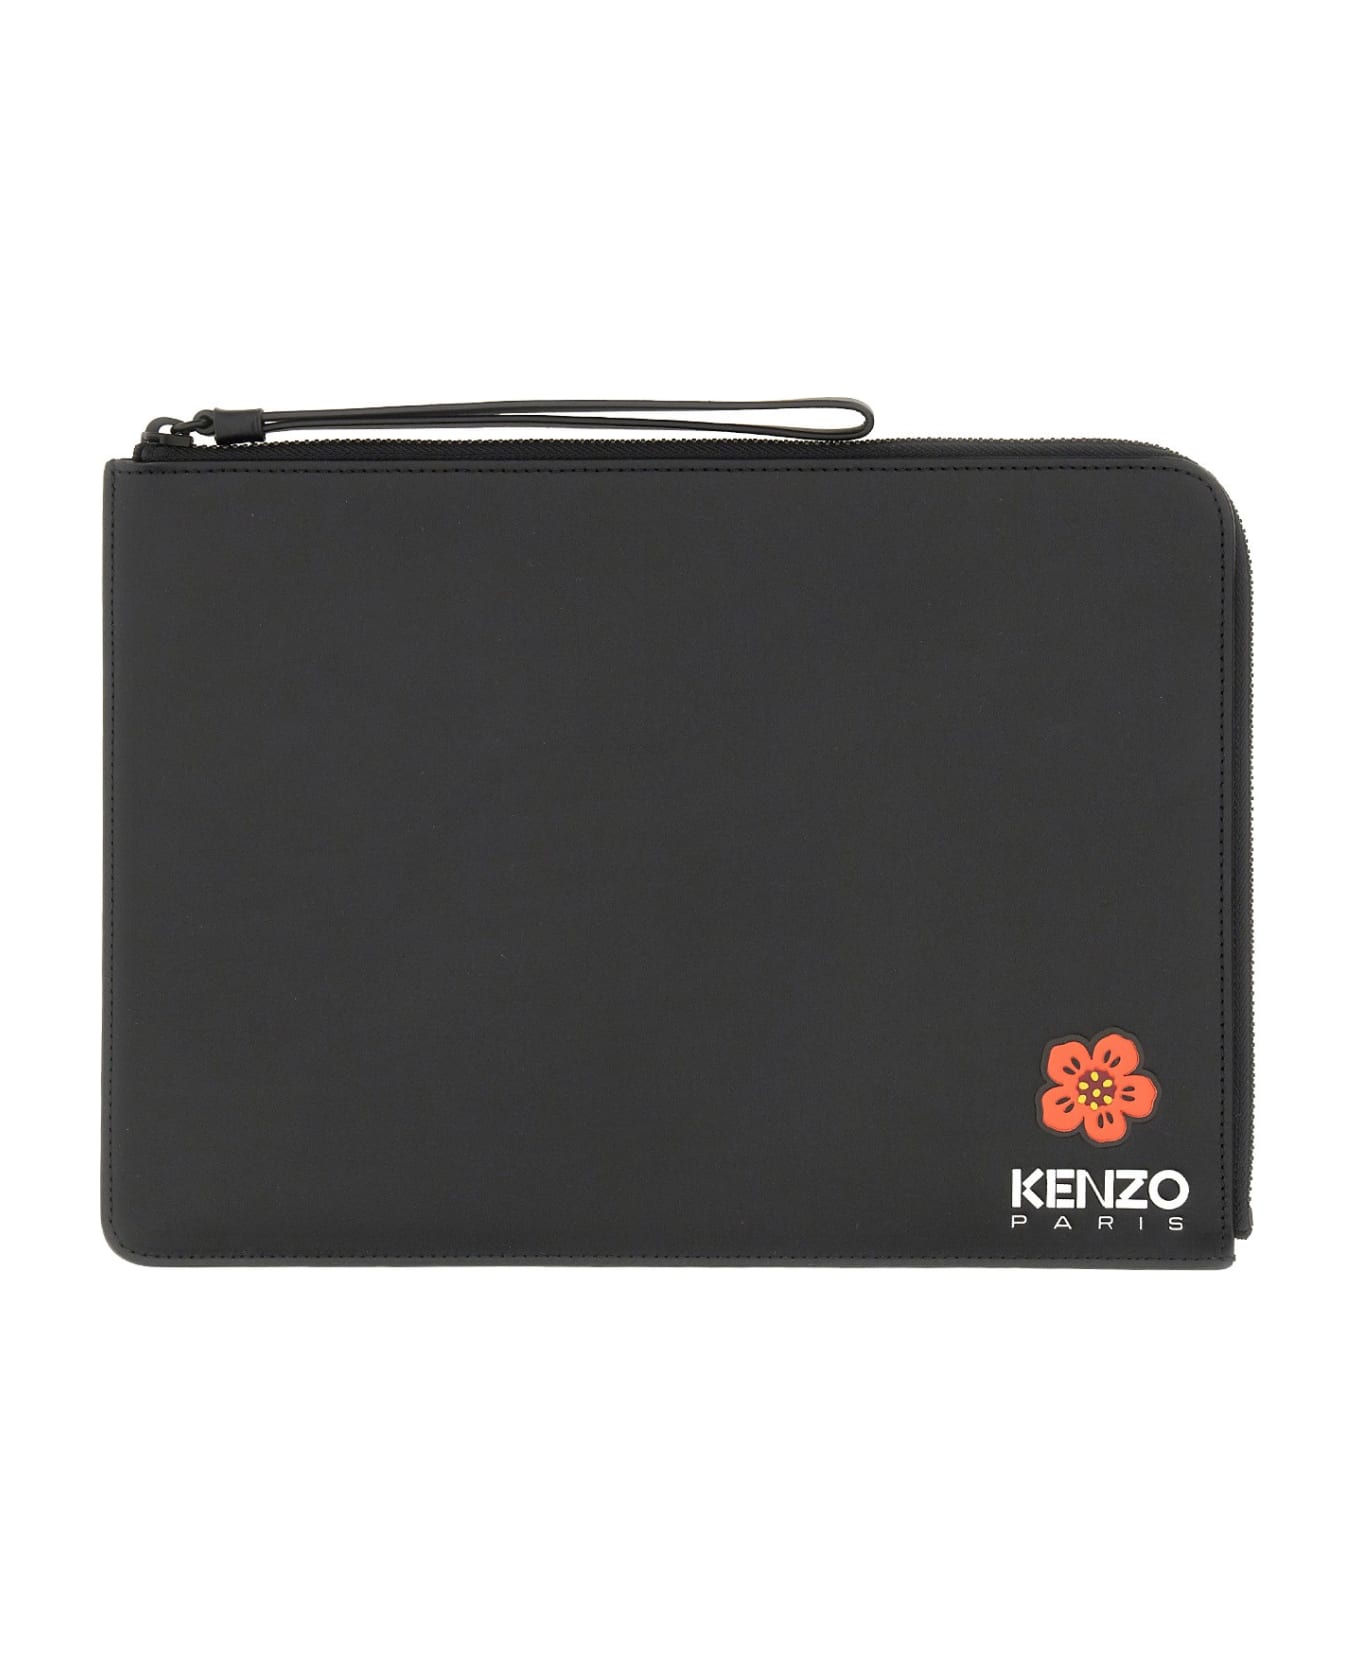 Kenzo Leather Clutch - black バッグ